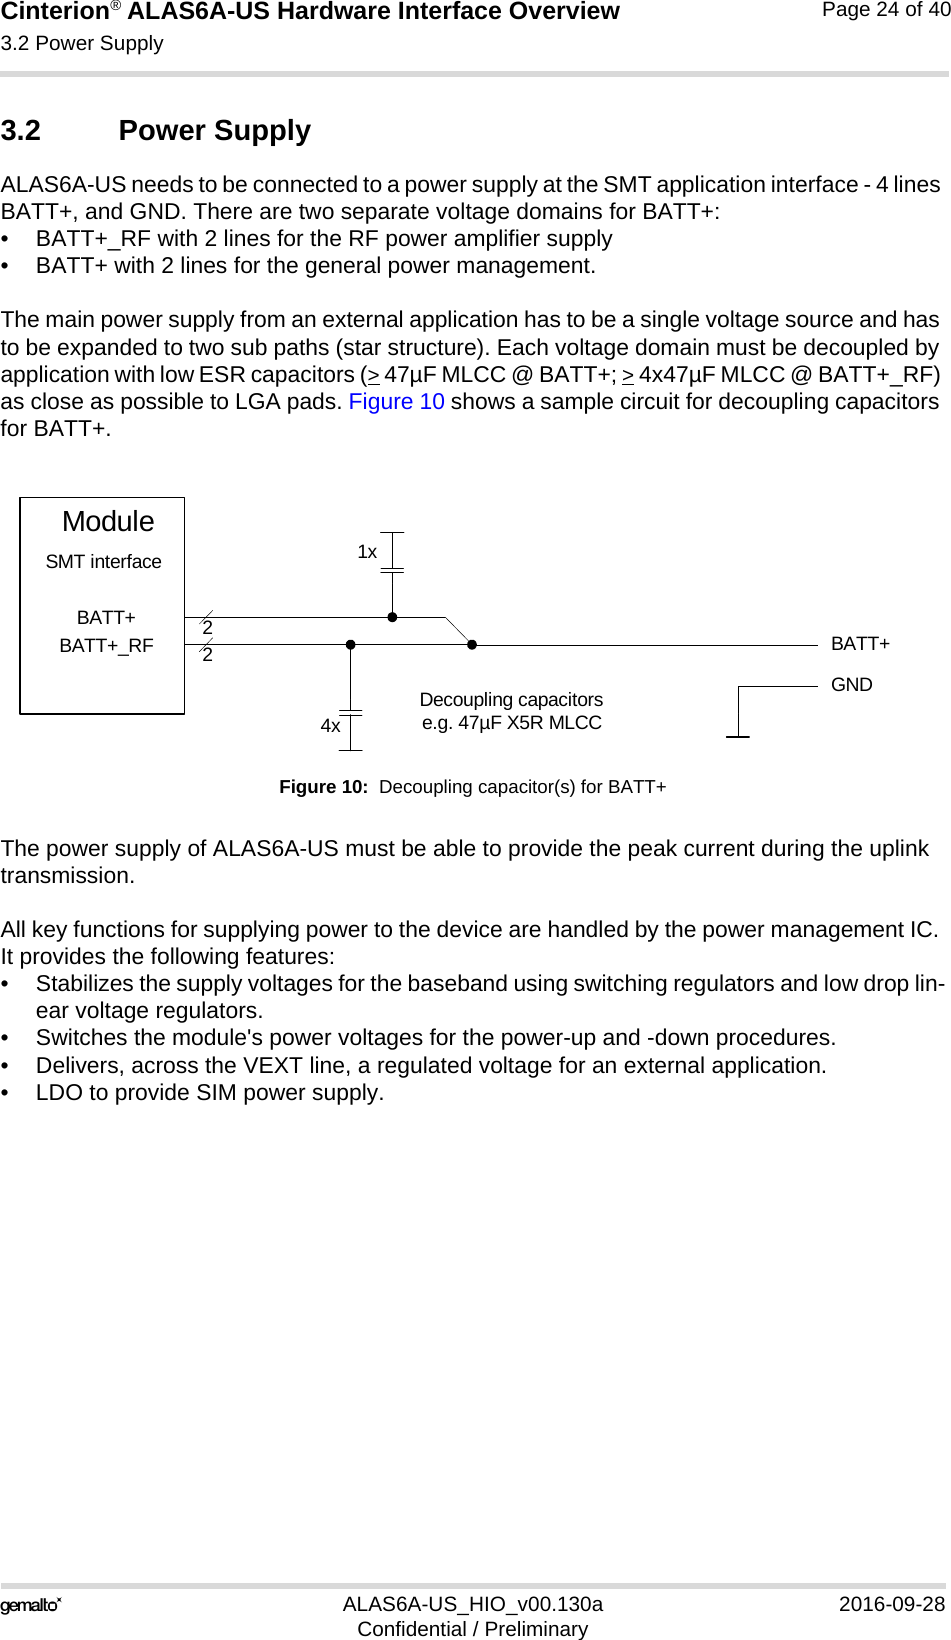 Cinterion® ALAS6A-US Hardware Interface Overview3.2 Power Supply24ALAS6A-US_HIO_v00.130a 2016-09-28Confidential / PreliminaryPage 24 of 403.2 Power SupplyALAS6A-US needs to be connected to a power supply at the SMT application interface - 4 lines BATT+, and GND. There are two separate voltage domains for BATT+:• BATT+_RF with 2 lines for the RF power amplifier supply • BATT+ with 2 lines for the general power management. The main power supply from an external application has to be a single voltage source and has to be expanded to two sub paths (star structure). Each voltage domain must be decoupled by application with low ESR capacitors (&gt; 47µF MLCC @ BATT+; &gt; 4x47µF MLCC @ BATT+_RF) as close as possible to LGA pads. Figure 10 shows a sample circuit for decoupling capacitors for BATT+.Figure 10:  Decoupling capacitor(s) for BATT+The power supply of ALAS6A-US must be able to provide the peak current during the uplink transmission. All key functions for supplying power to the device are handled by the power management IC. It provides the following features:• Stabilizes the supply voltages for the baseband using switching regulators and low drop lin-ear voltage regulators.• Switches the module&apos;s power voltages for the power-up and -down procedures.• Delivers, across the VEXT line, a regulated voltage for an external application.• LDO to provide SIM power supply.BATT+22Decoupling capacitorse.g. 47µF X5R MLCC4xGNDBATT+BATT+_RFModuleSMT interface 1x